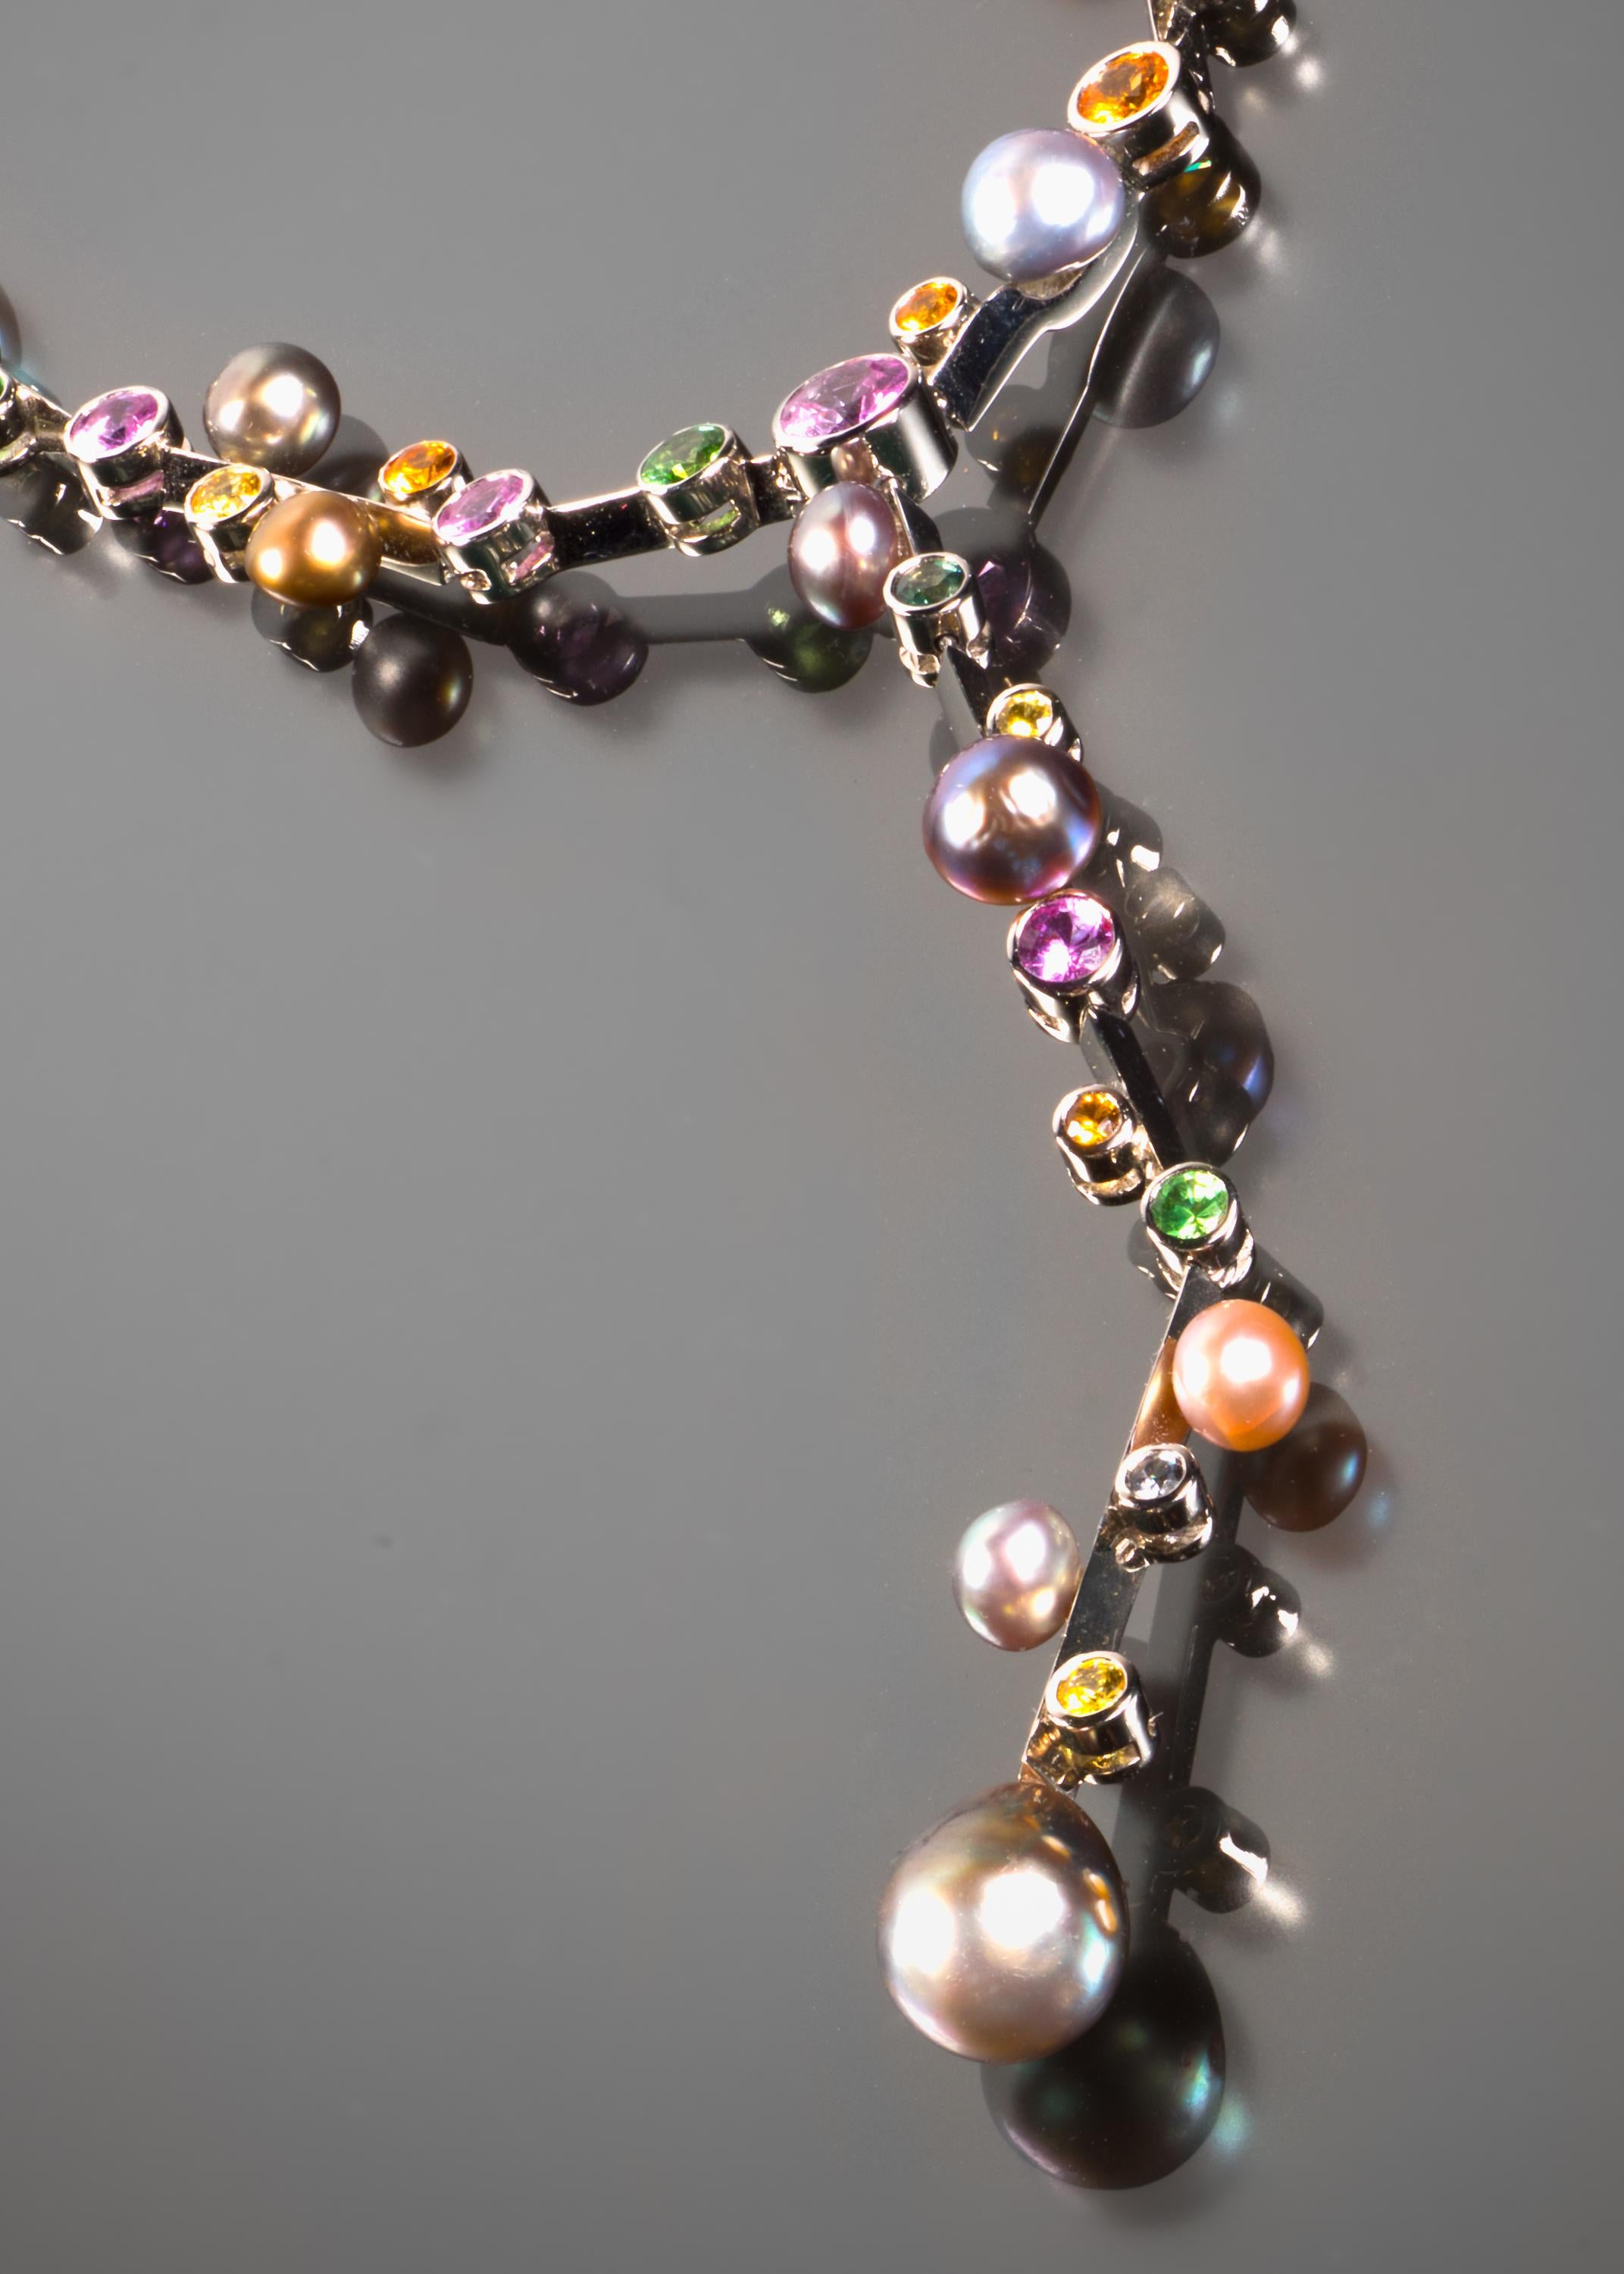 This sophisticated gem set necklace takes a modern approach to colored stones. Vived-hued sapphires in shades of pink, green, blue, orange and yellow are randomly placed along a flexible white gold necklace, while rare natural pearls of varying